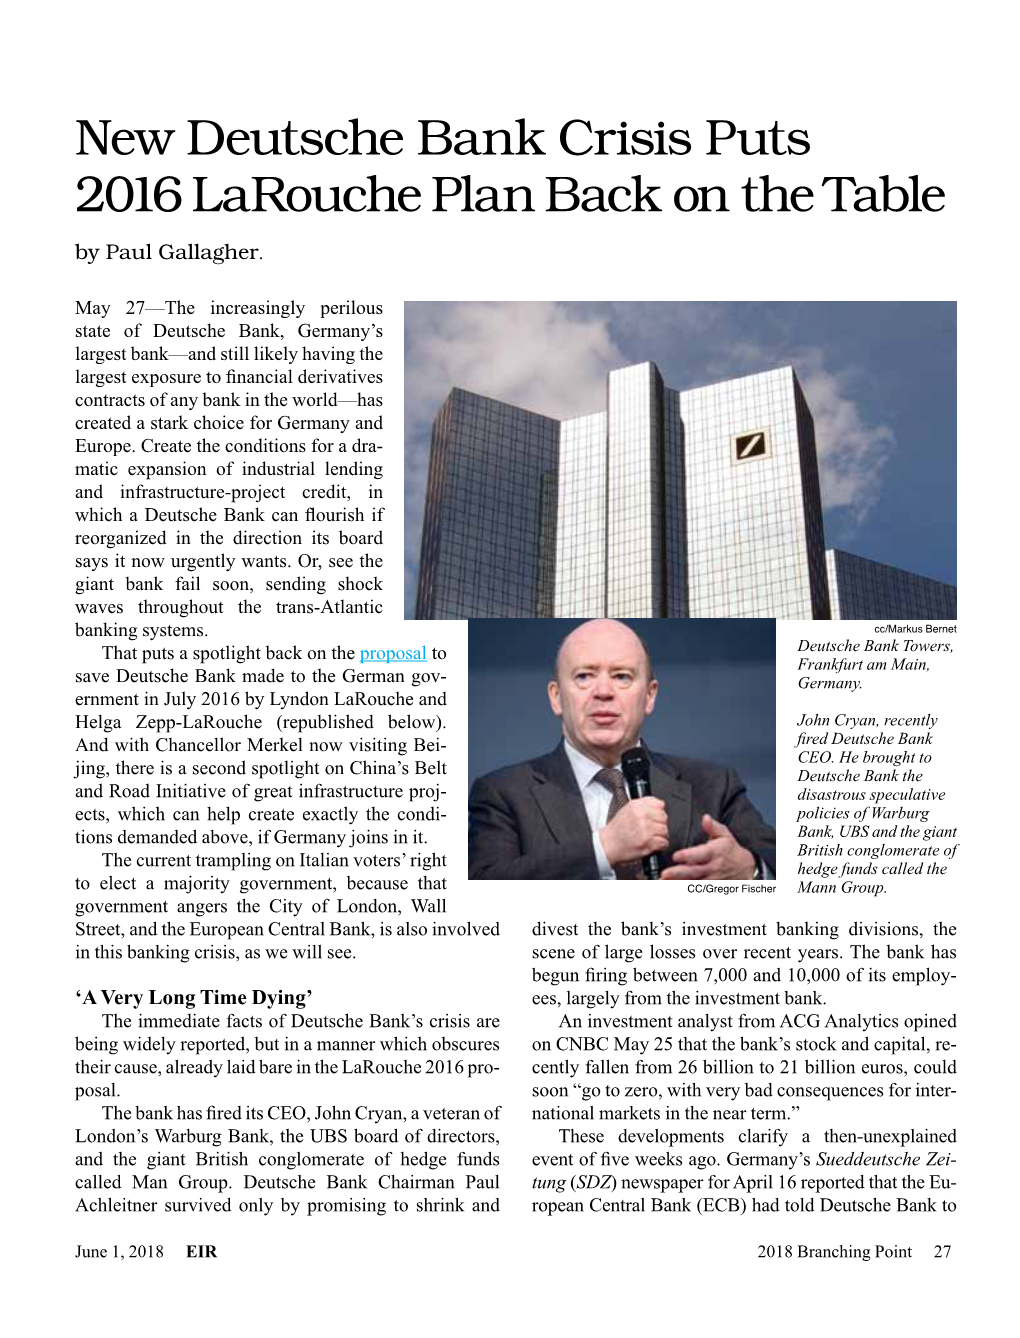 New Deutsche Bank Crisis Puts 2016 Larouche Plan Back on the Table by Paul Gallagher